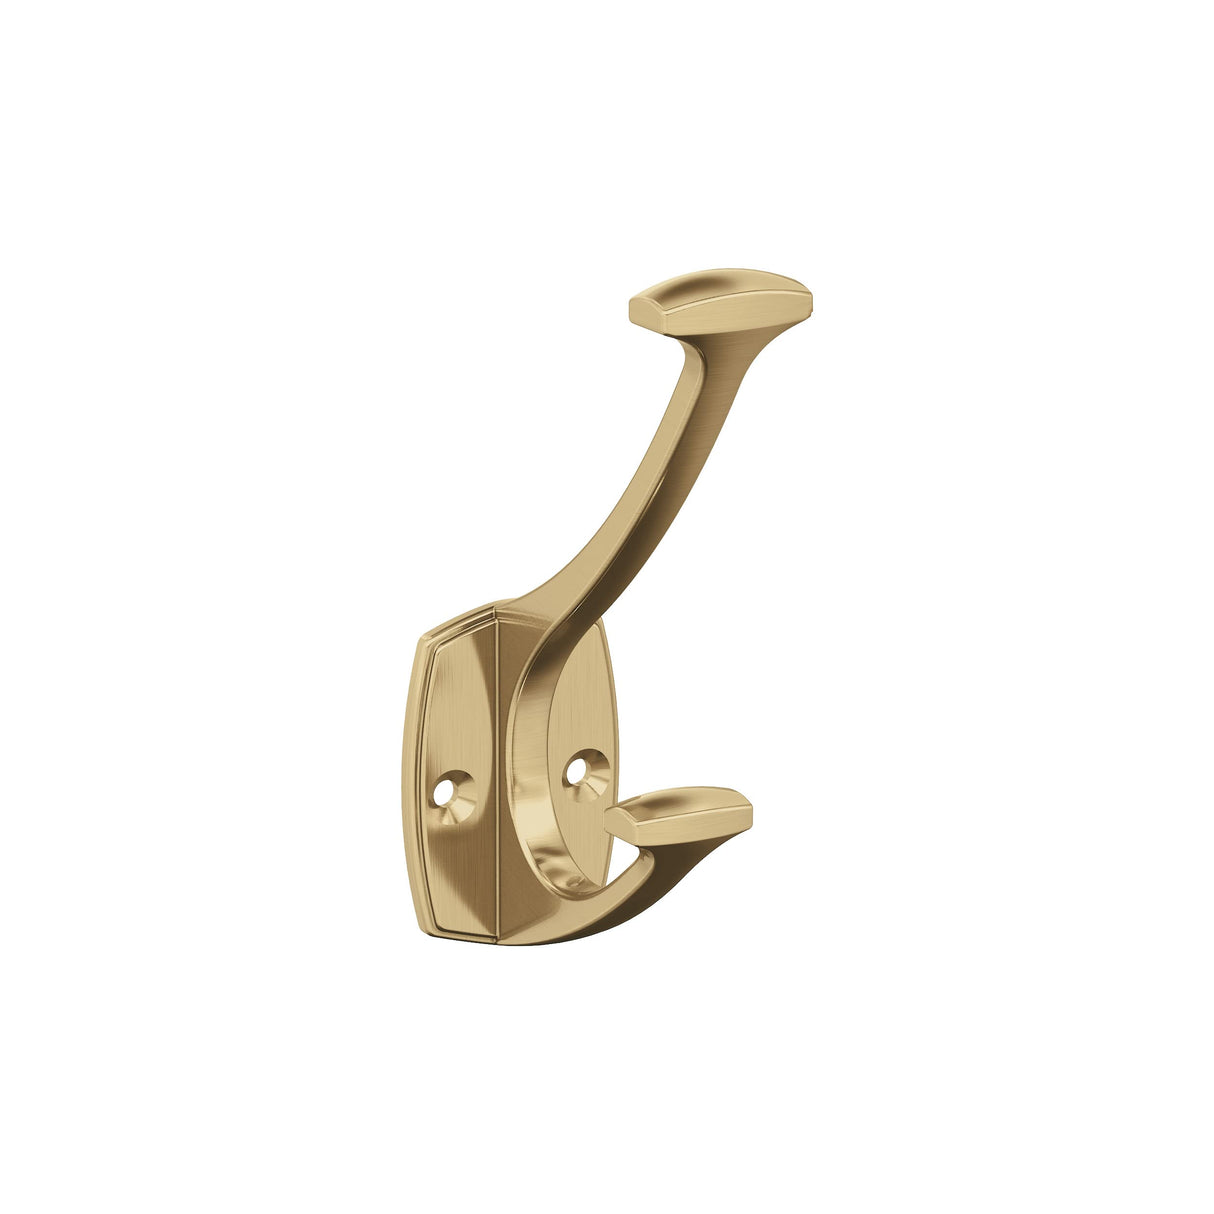 Amerock H37001CZ Vicinity Double Prong Decorative Wall Hook Champagne Bronze Hook for Coats, Hats, Backpacks, Bags Hooks for Bathroom, Bedroom, Closet, Entryway, Laundry Room, Office